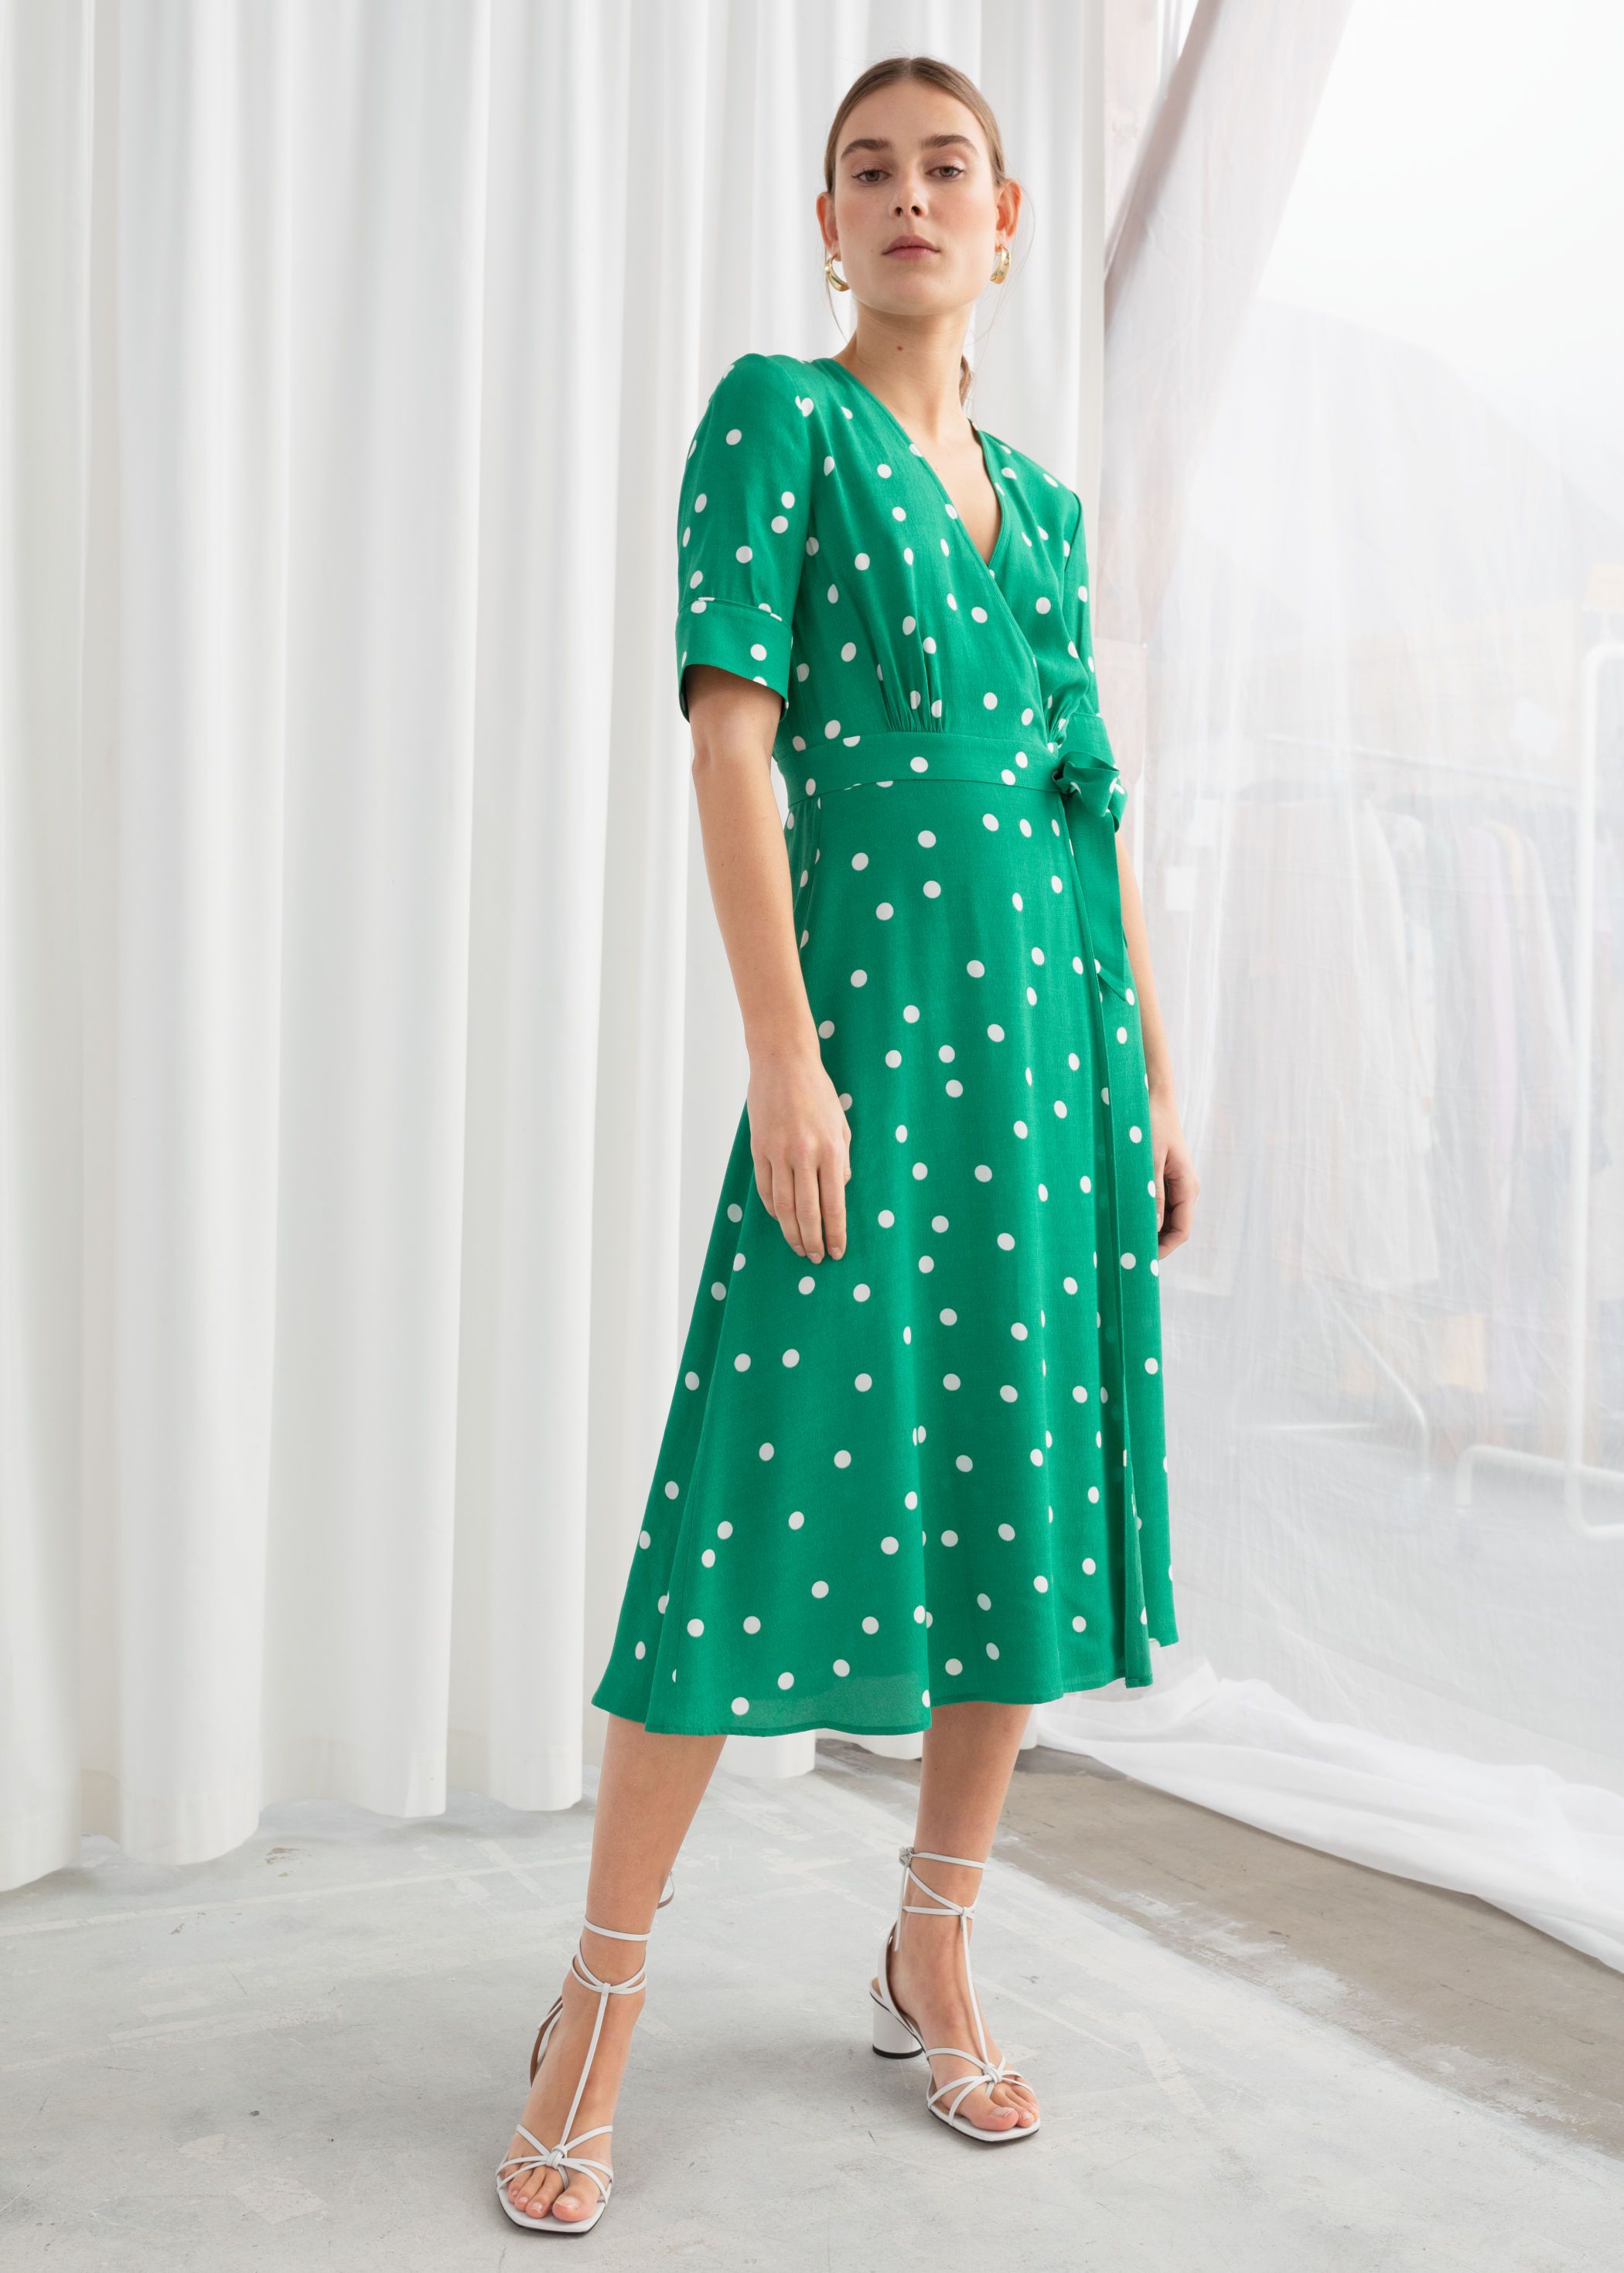 & other stories green wrap dress